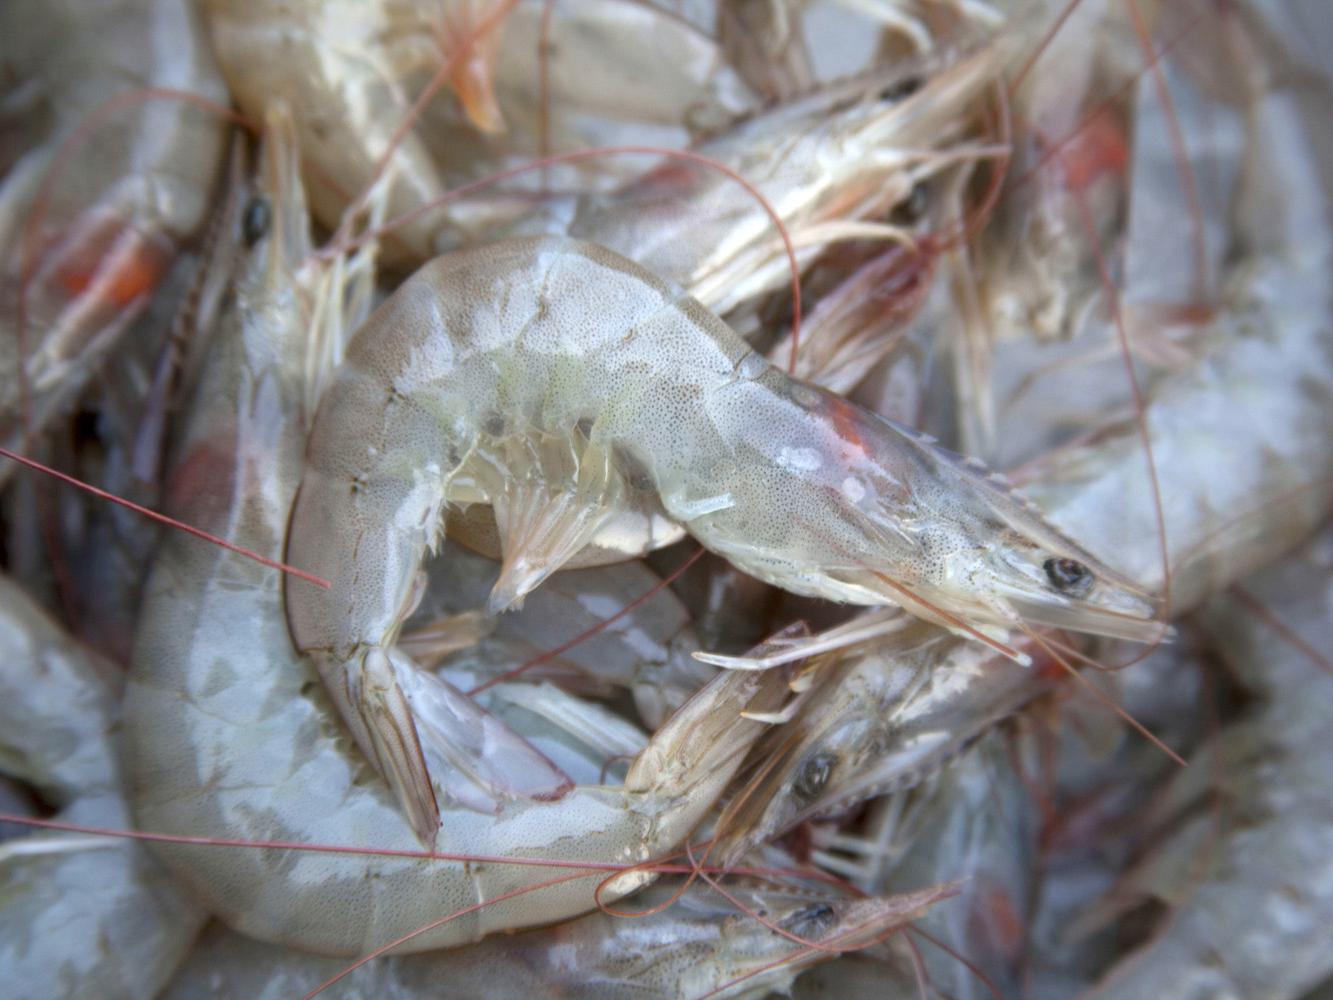 The bulk of the 1.137 million pounds of shrimp landed in Biloxi during the first two weeks of the season have been medium, 36- to 40-count shrimp. (Photo by MSU Ag Communications/Kat Lawrence)